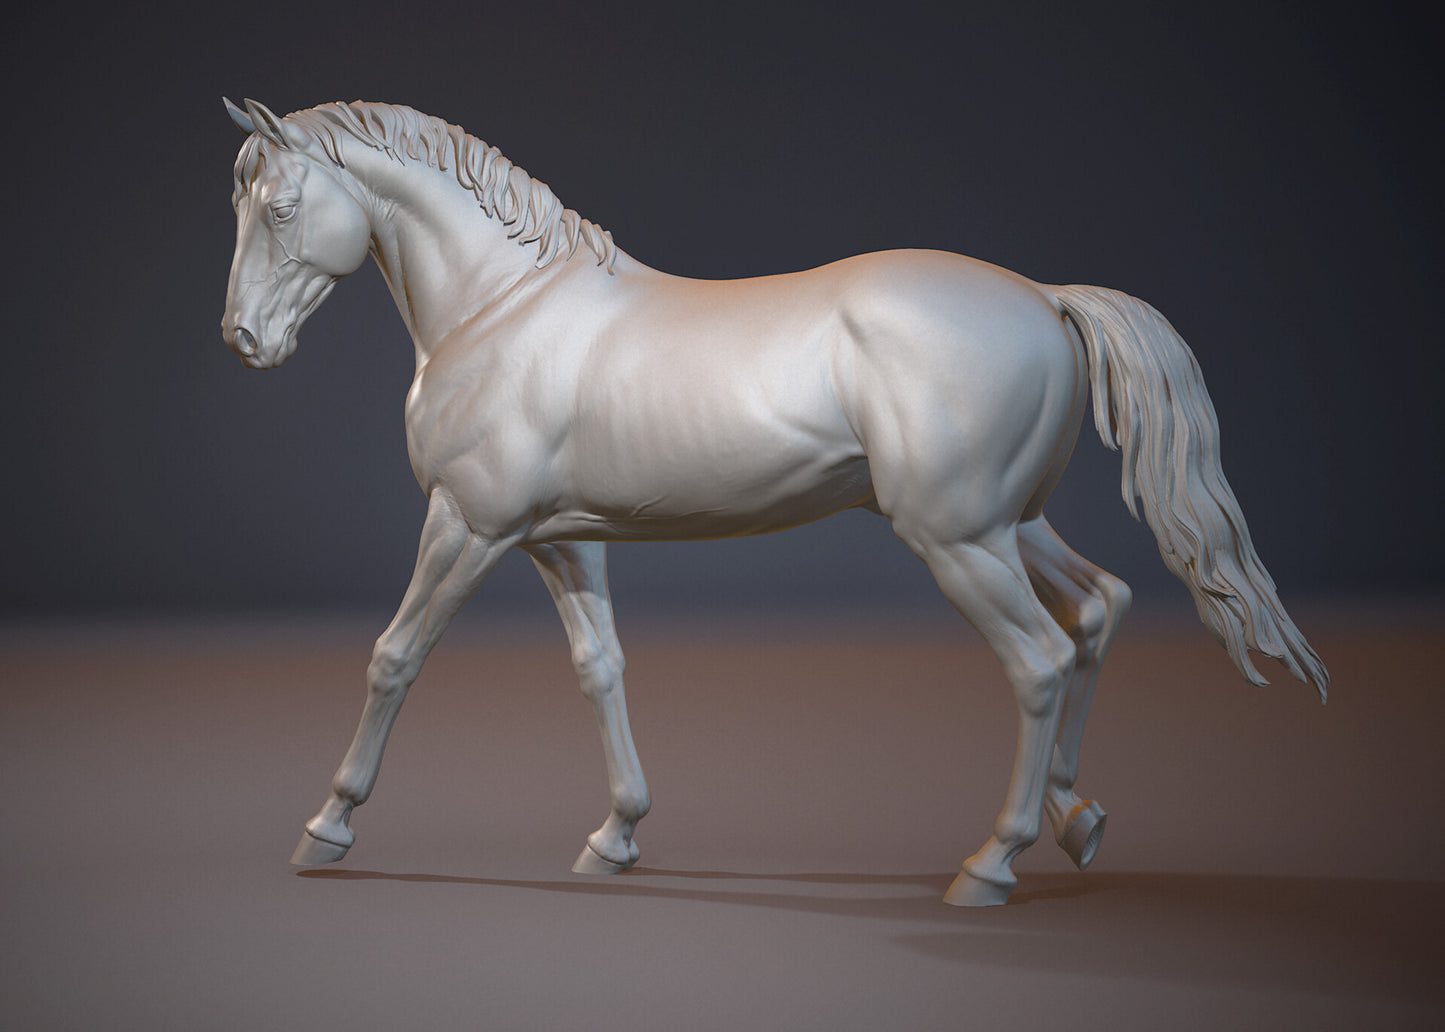 Walking horse - White resin ready to prep / paint  LTD EDITION - Pre - Order